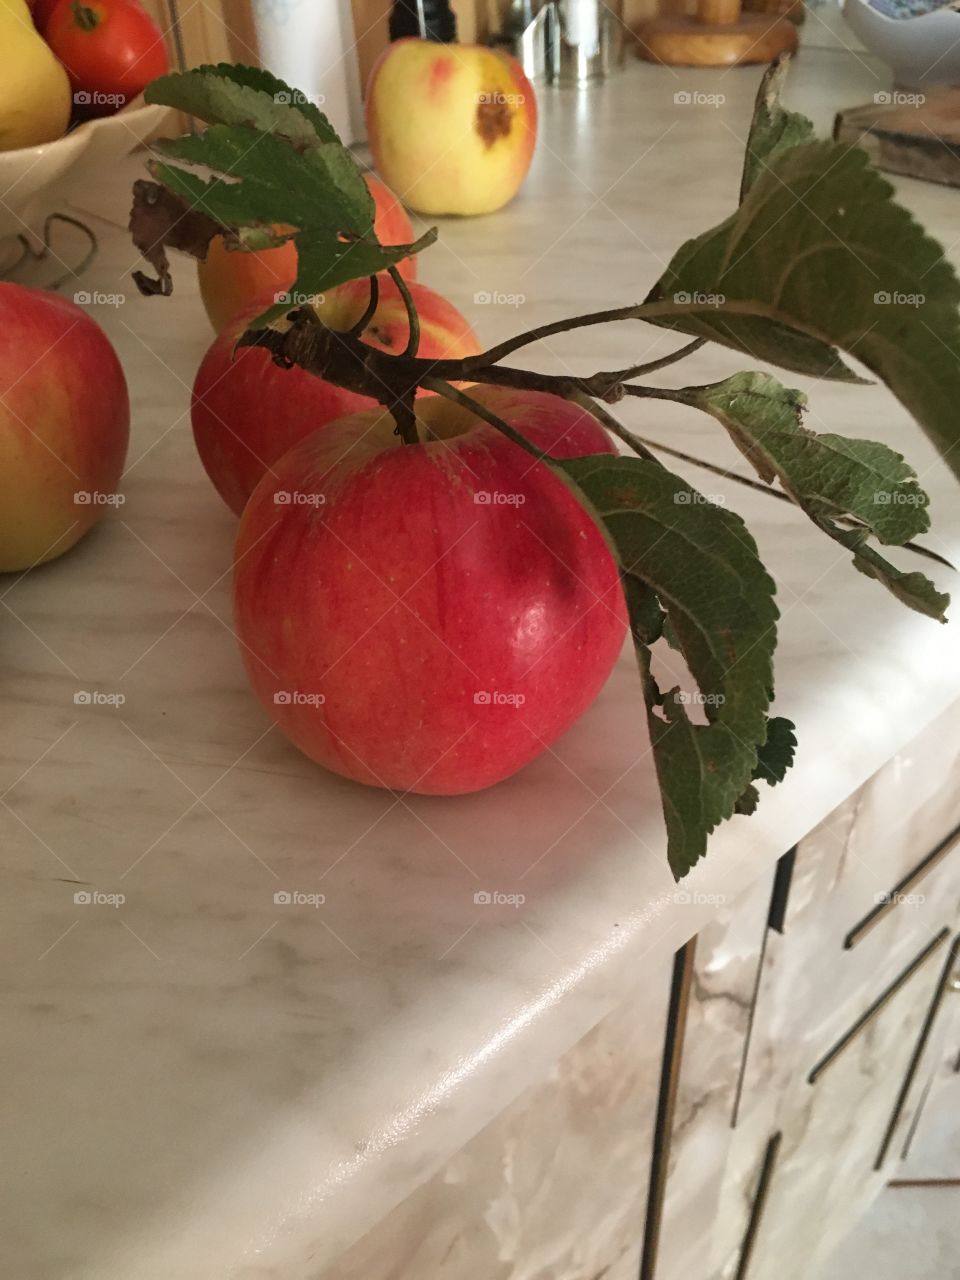 Apple on the counter